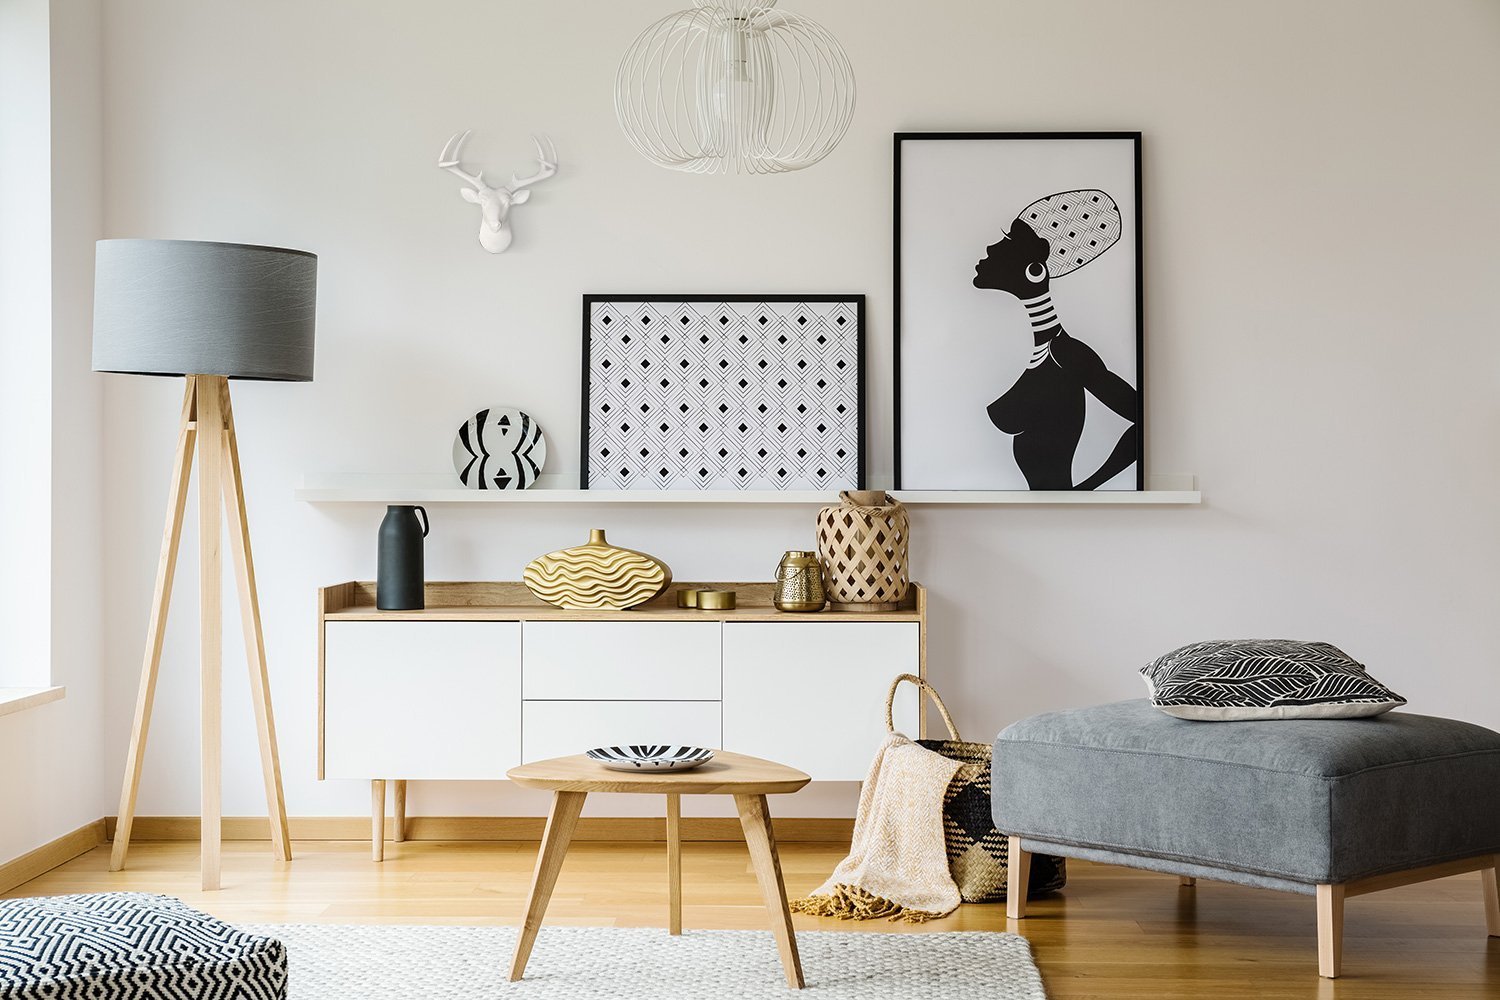 Design Tips for the Perfect Gallery Wall!